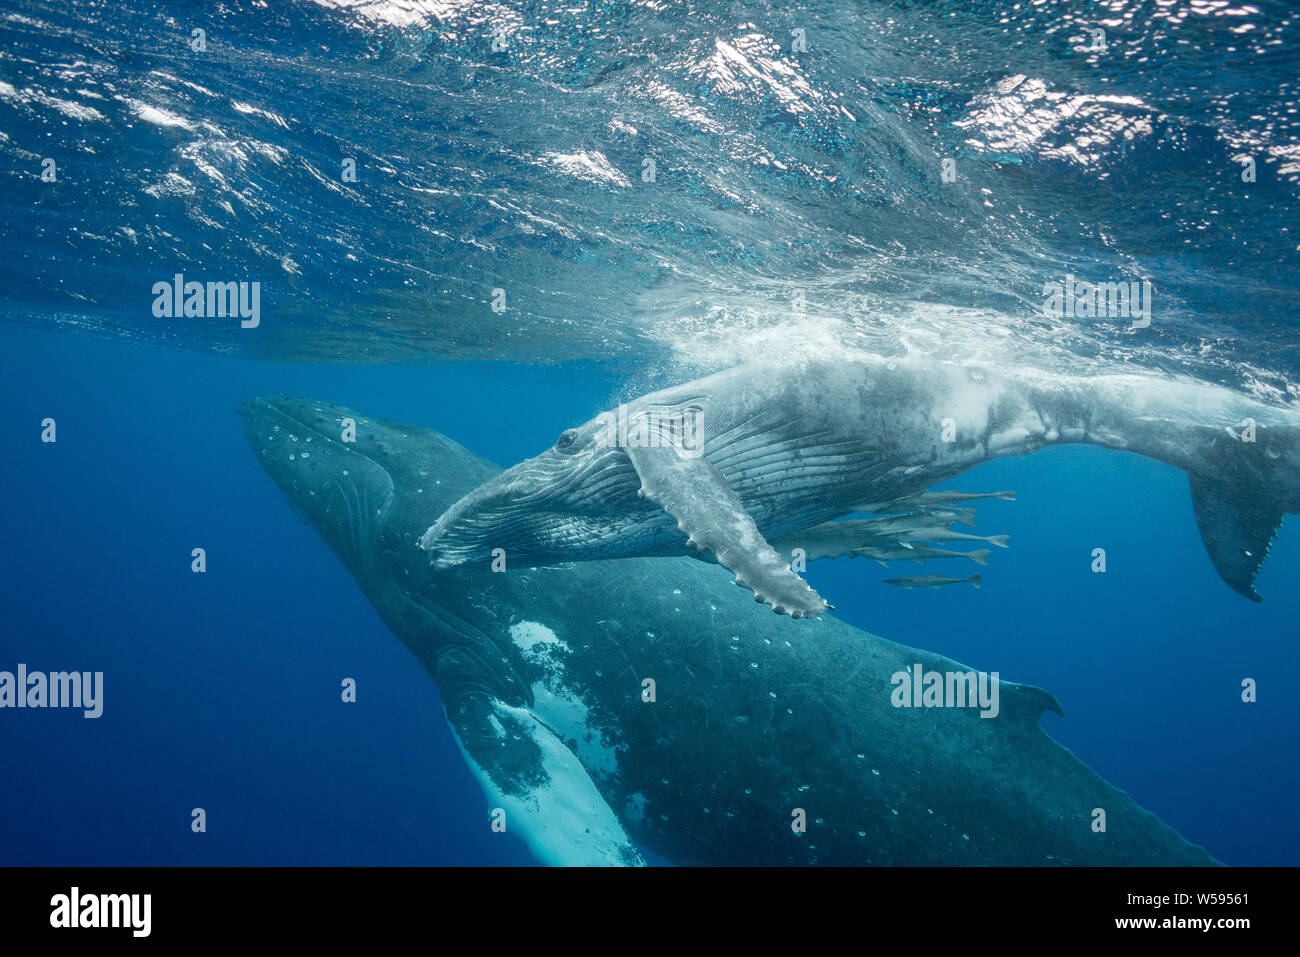 humpback whale mother and calf, Megaptera novaeangliae; baby whale is accompanied by remoras or suckerfish under its belly; Vava'u, Kingdom of Tonga, Stock Photo